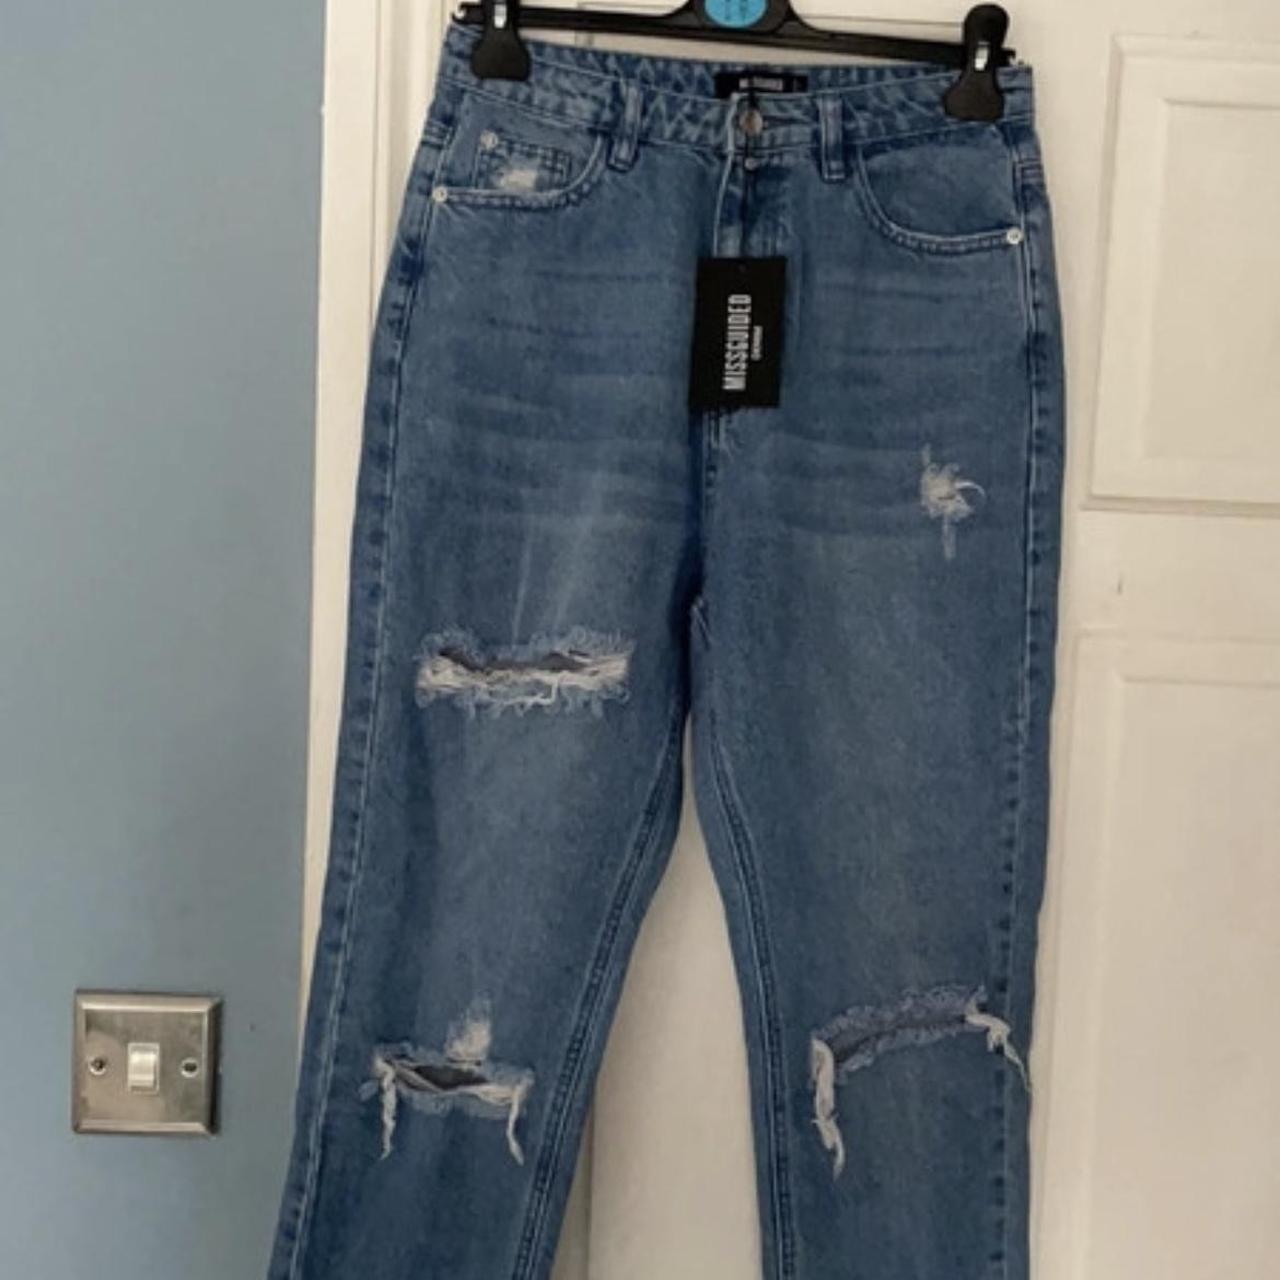 Mig guided ripped jeans Size 10 never worn New with... - Depop